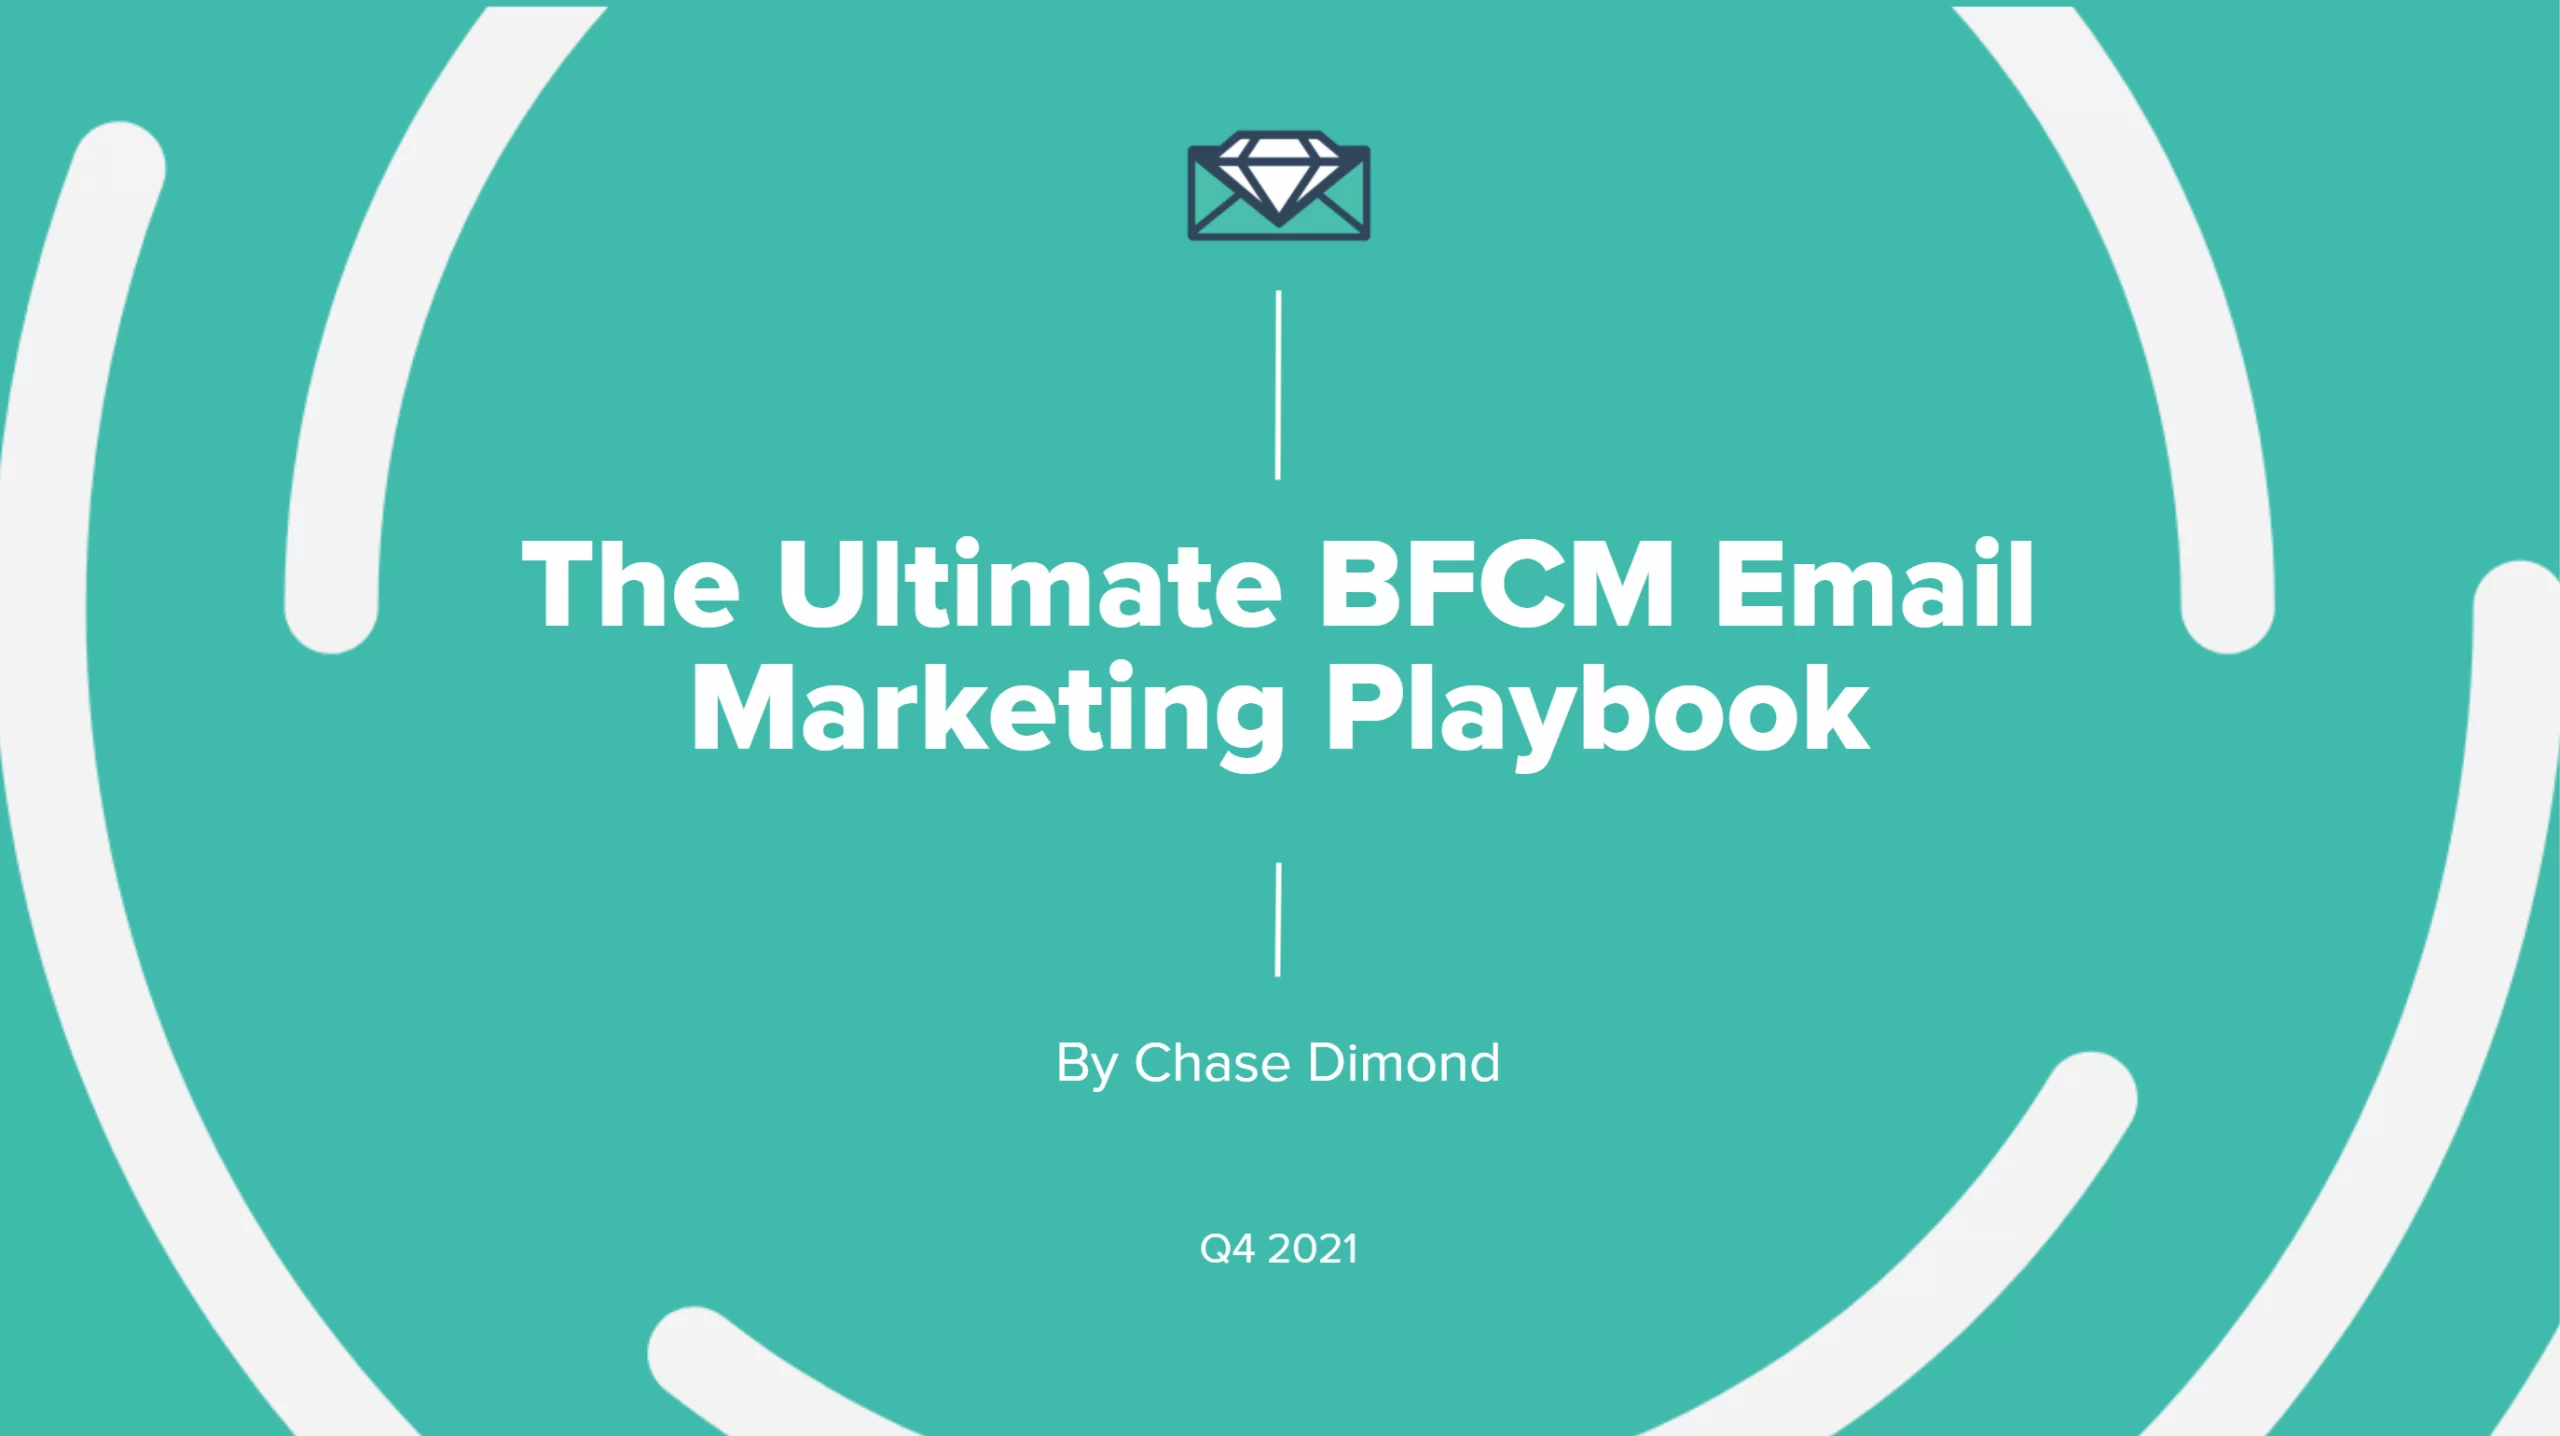 Chase Dimond – The Ultimate BFCM Email Marketing Playbook Download